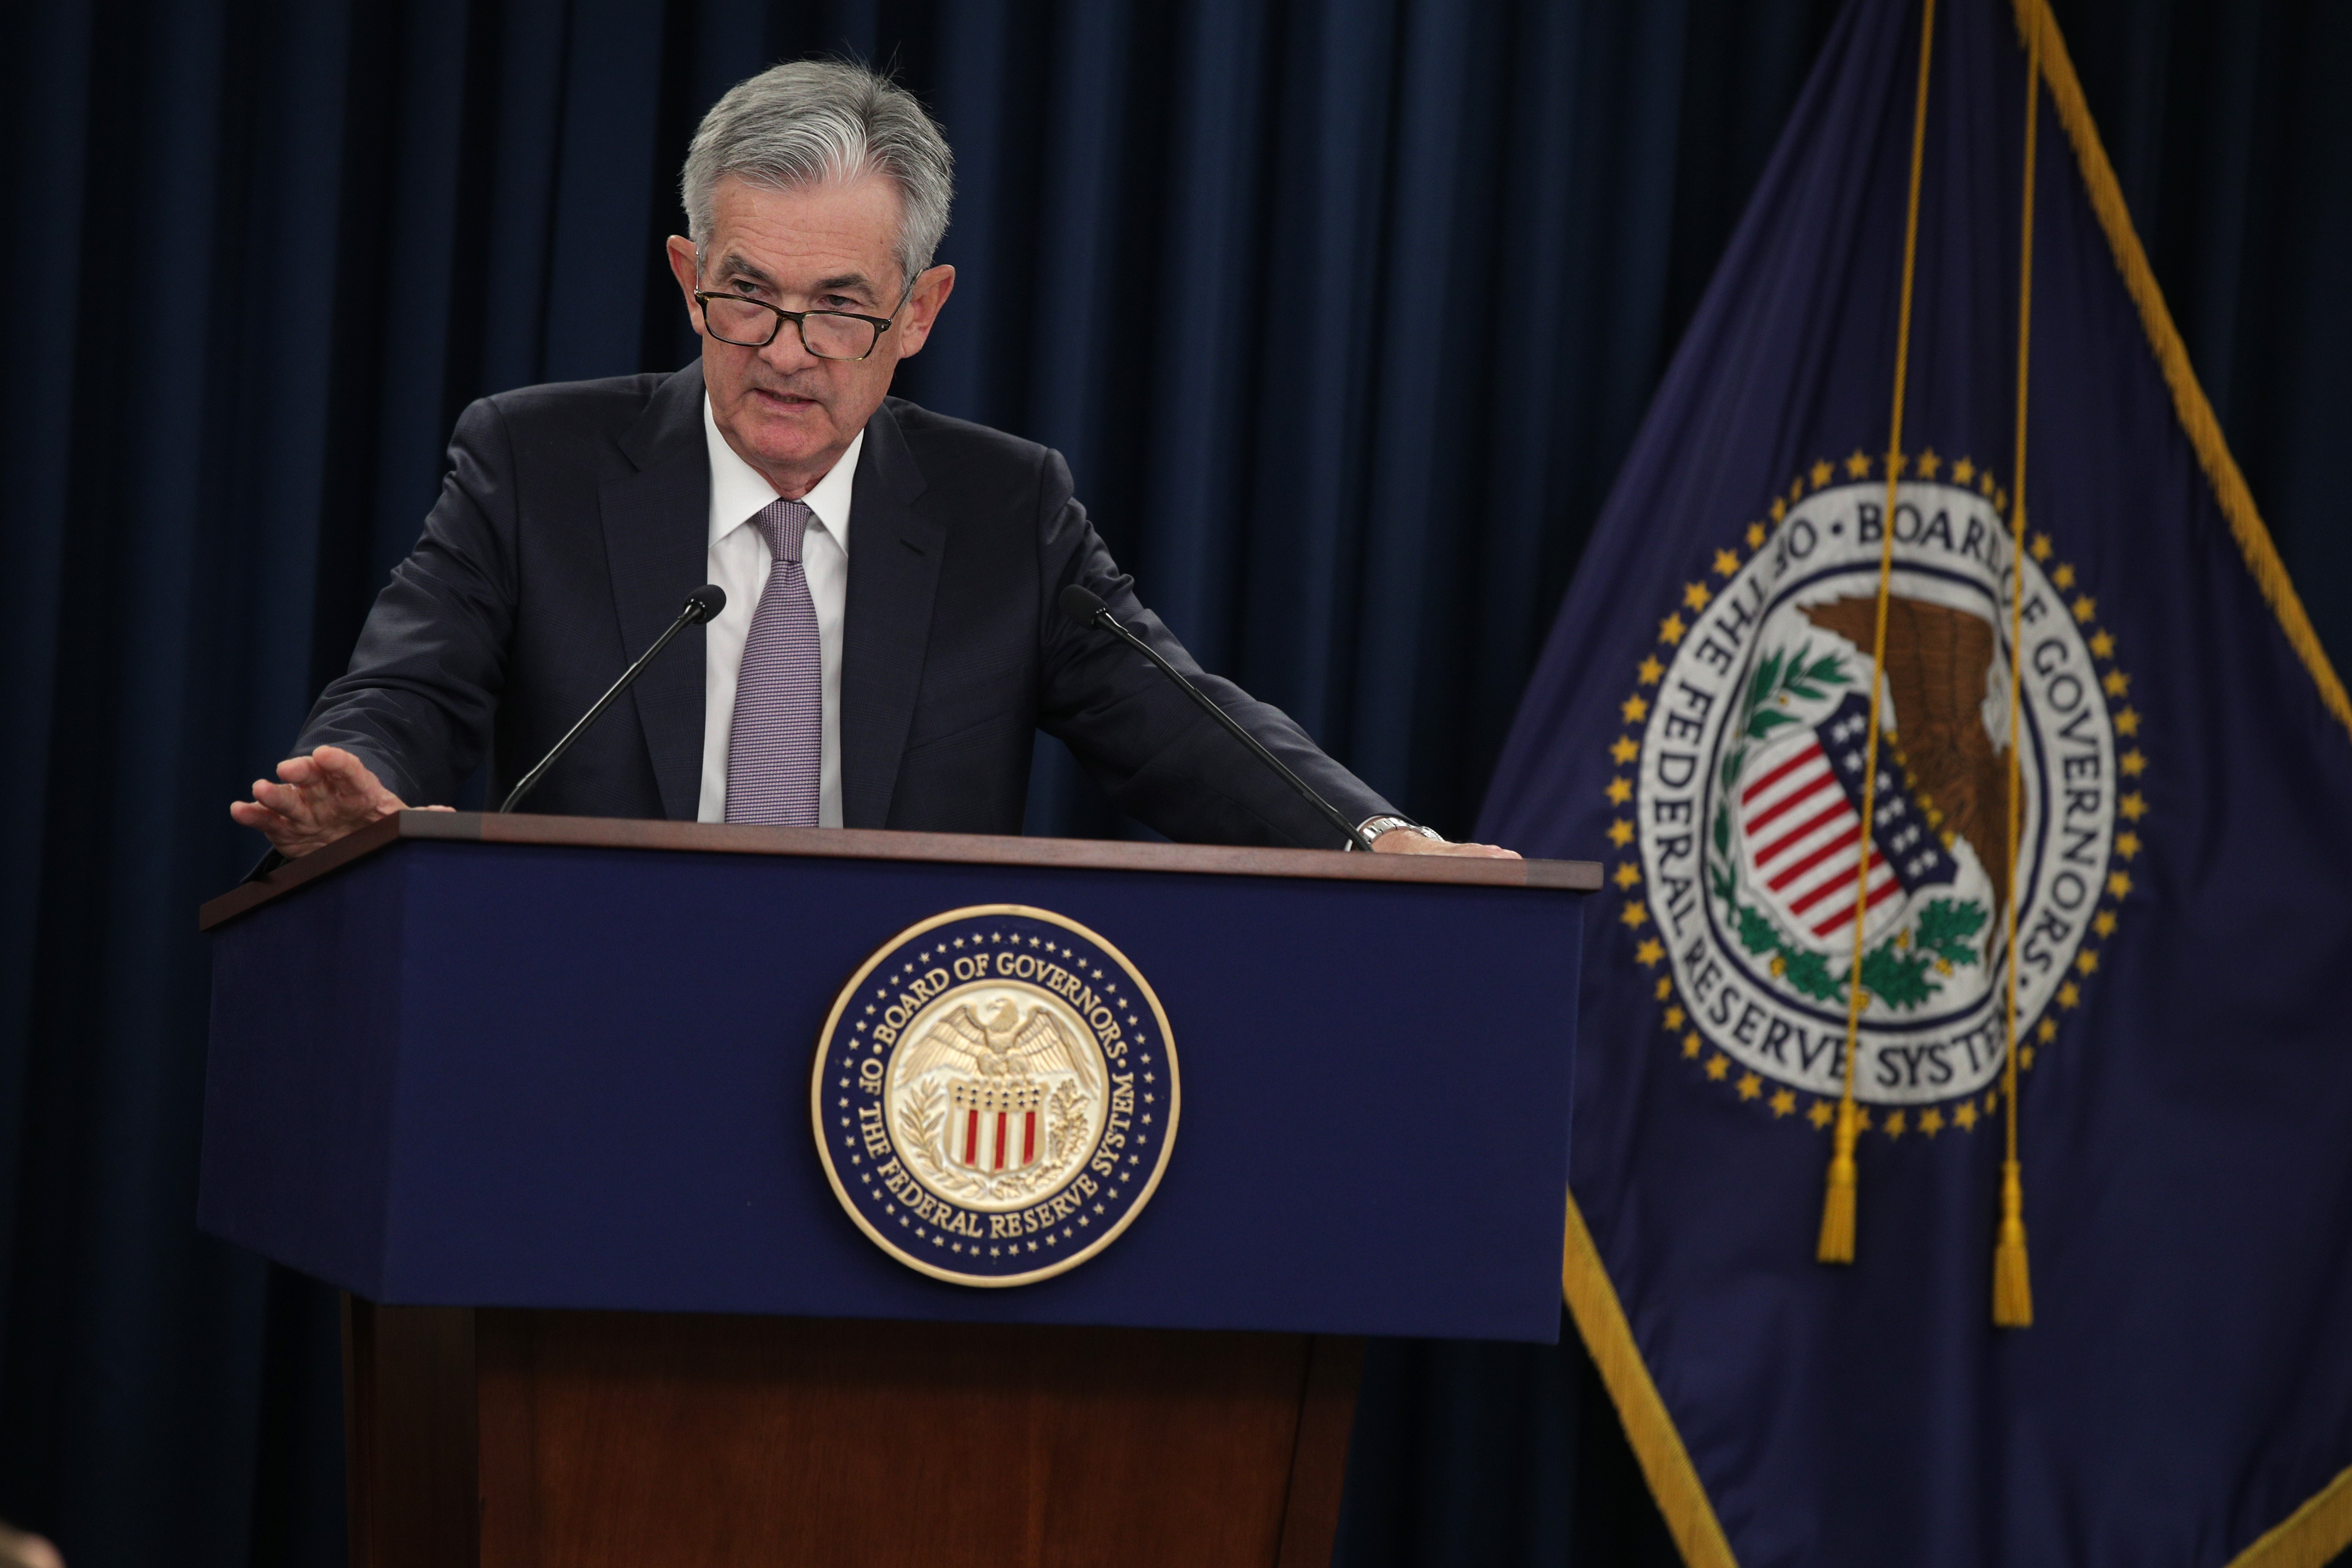 Jerome Powell, presidente do Federal Reserve (Foto:  Alex Wong/Getty Images)